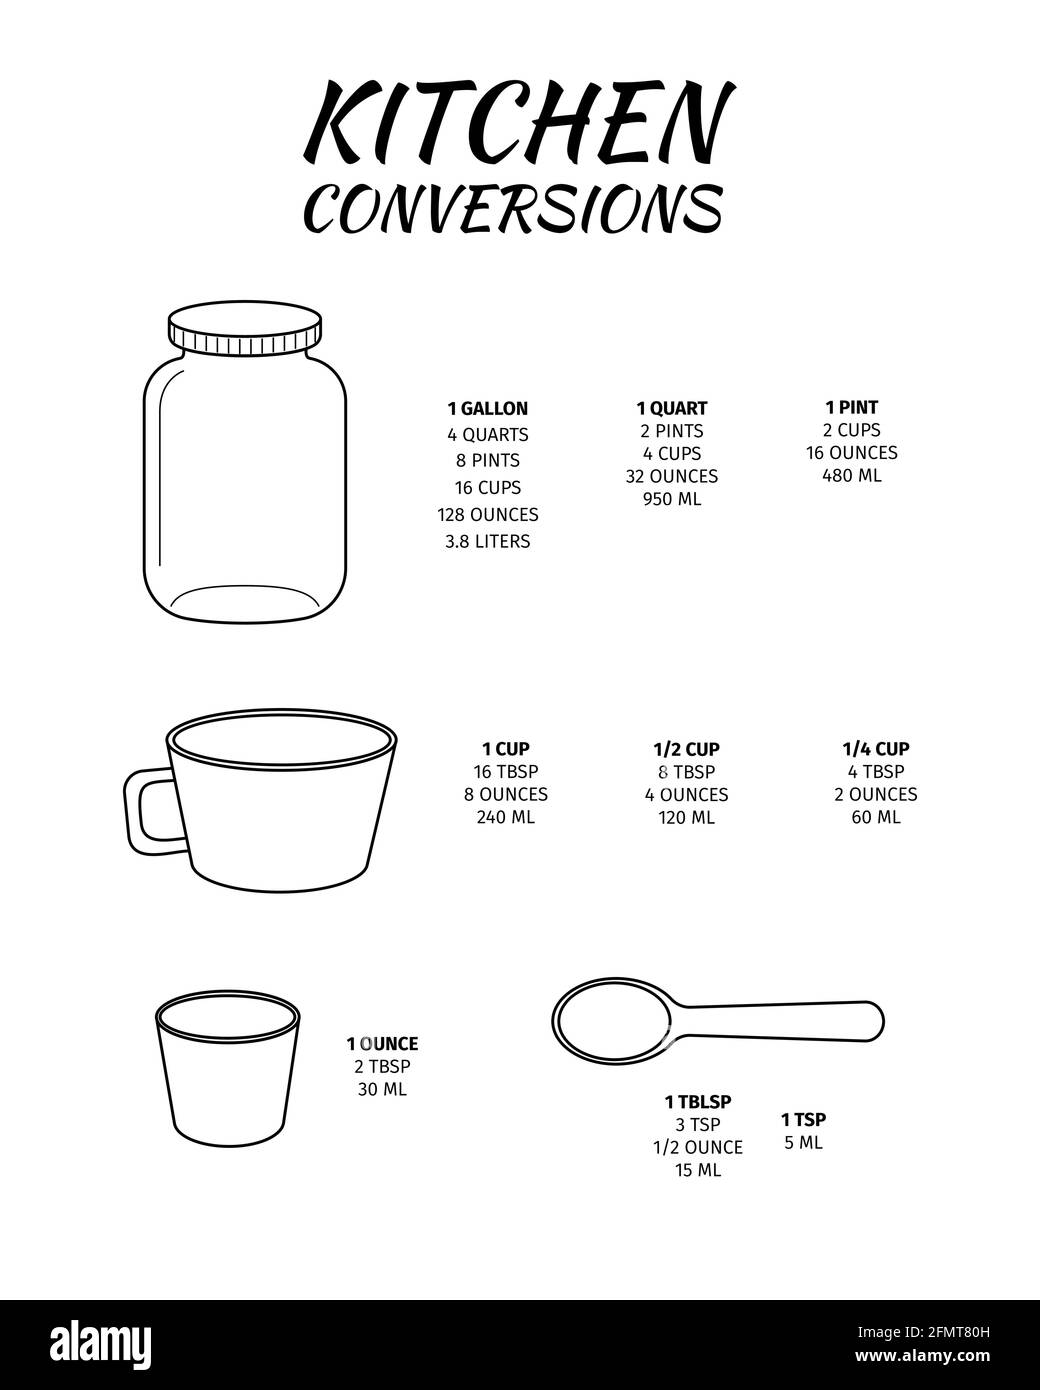 Kitchen conversions chart with jar, cup, ounce glass, spoon. Basic